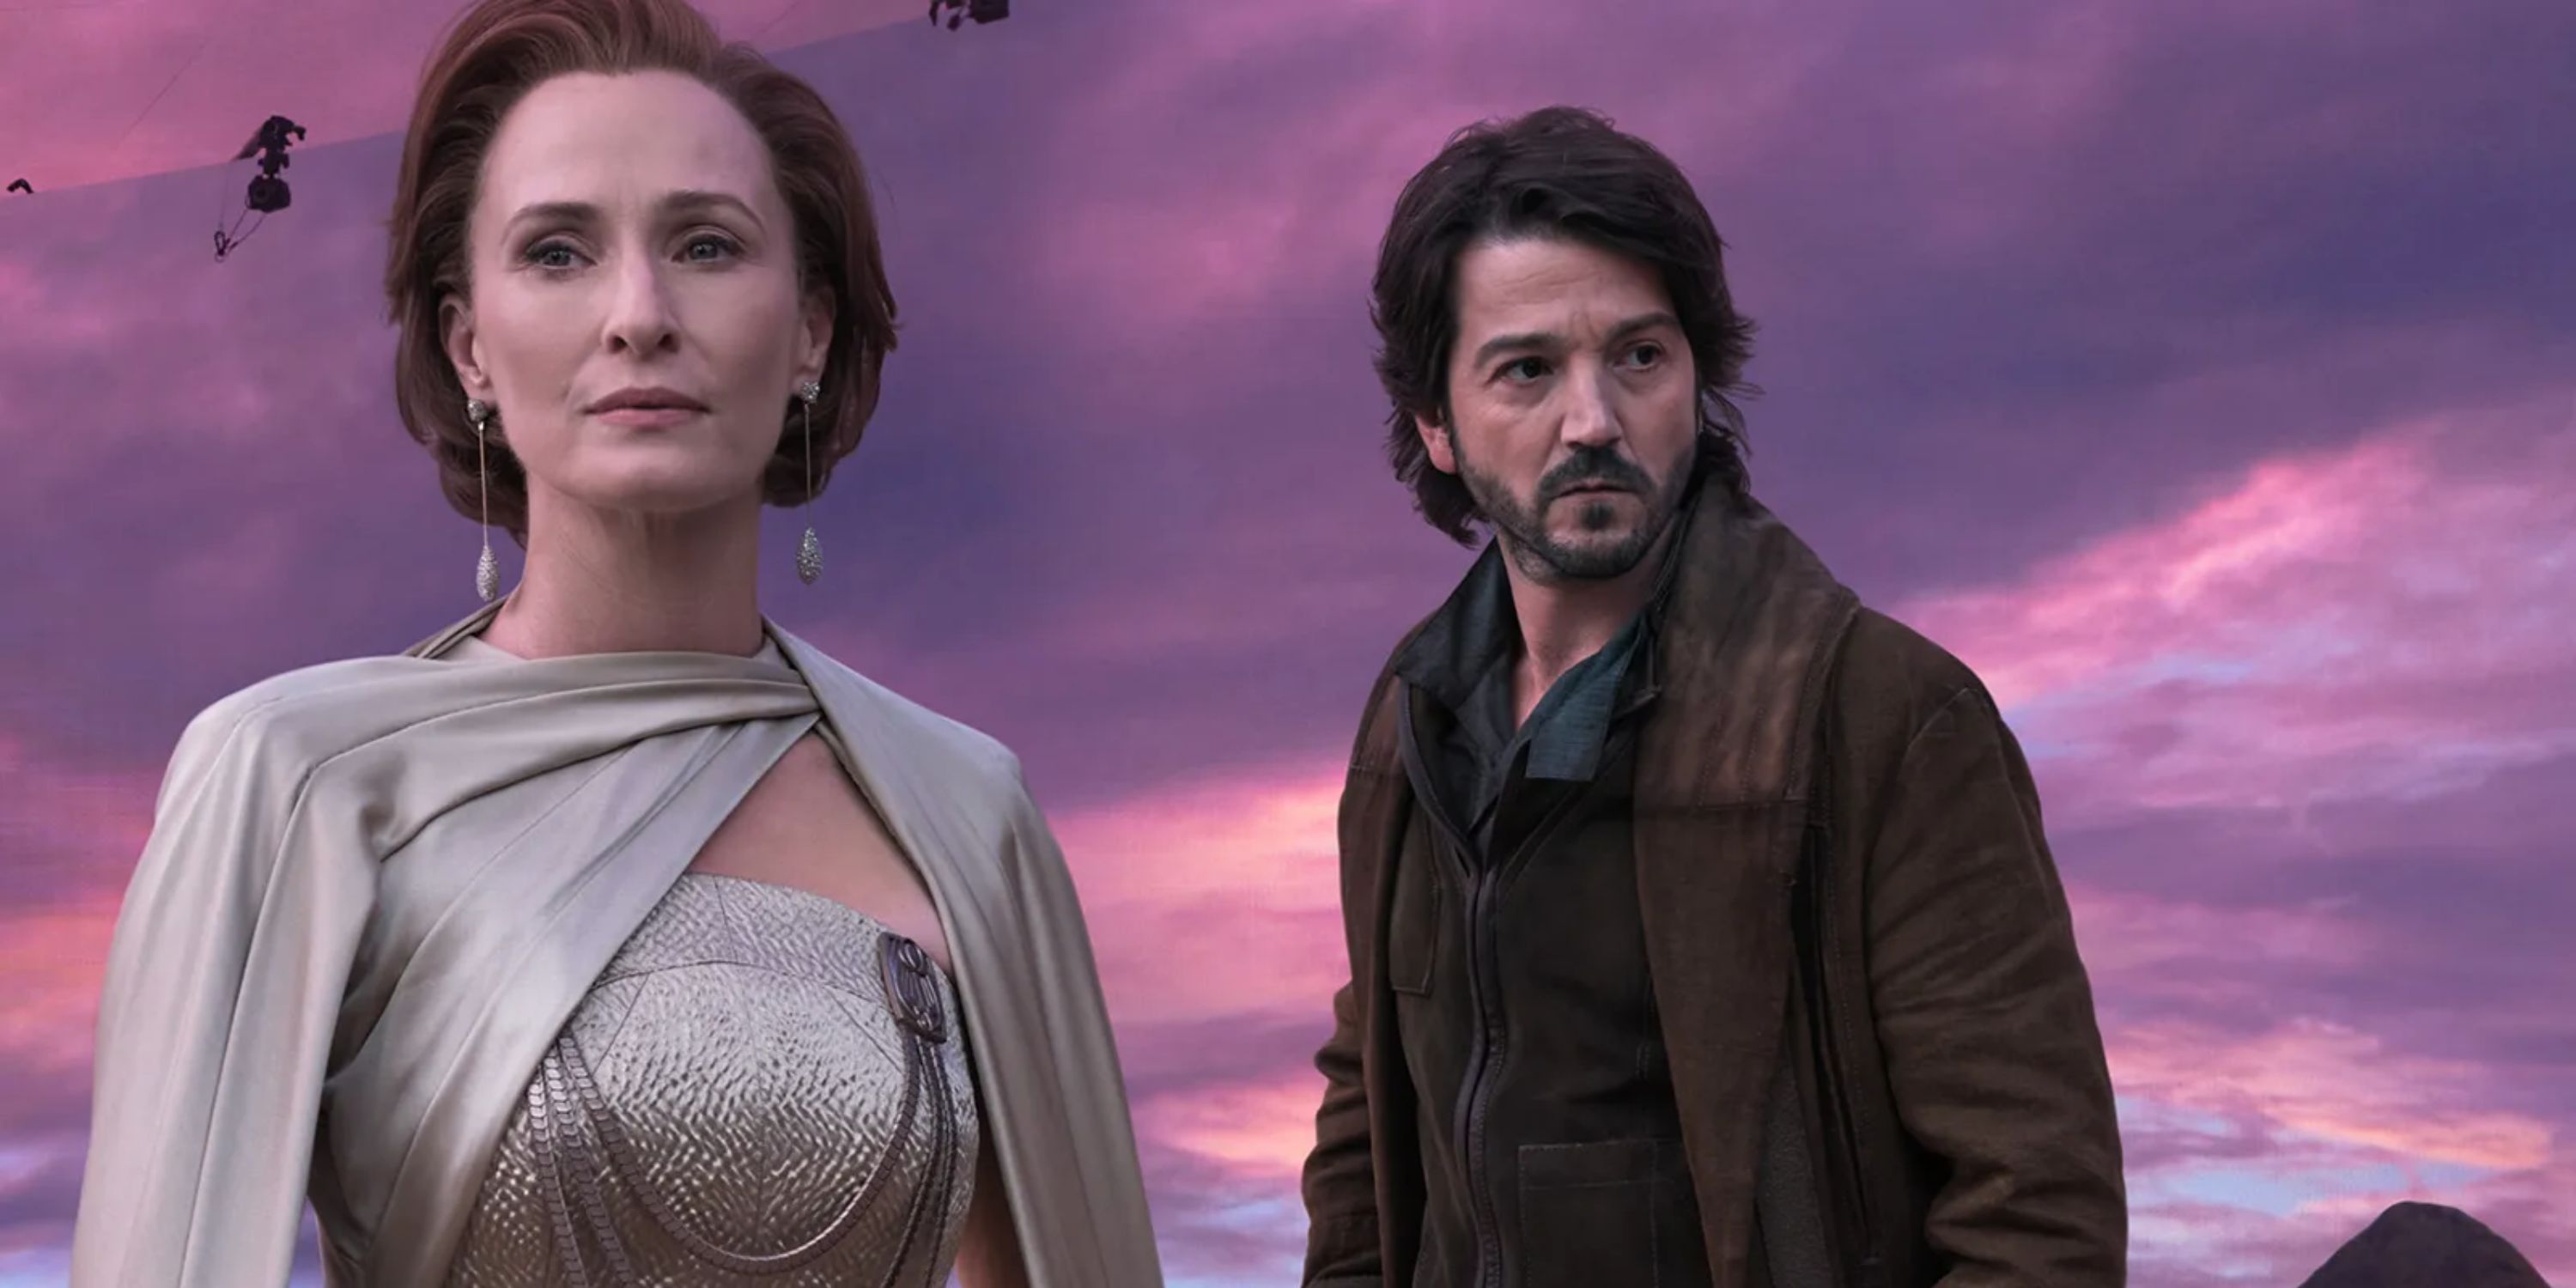 Star Wars’ Andor Will Reveal More About Mon Mothma, Says Actor